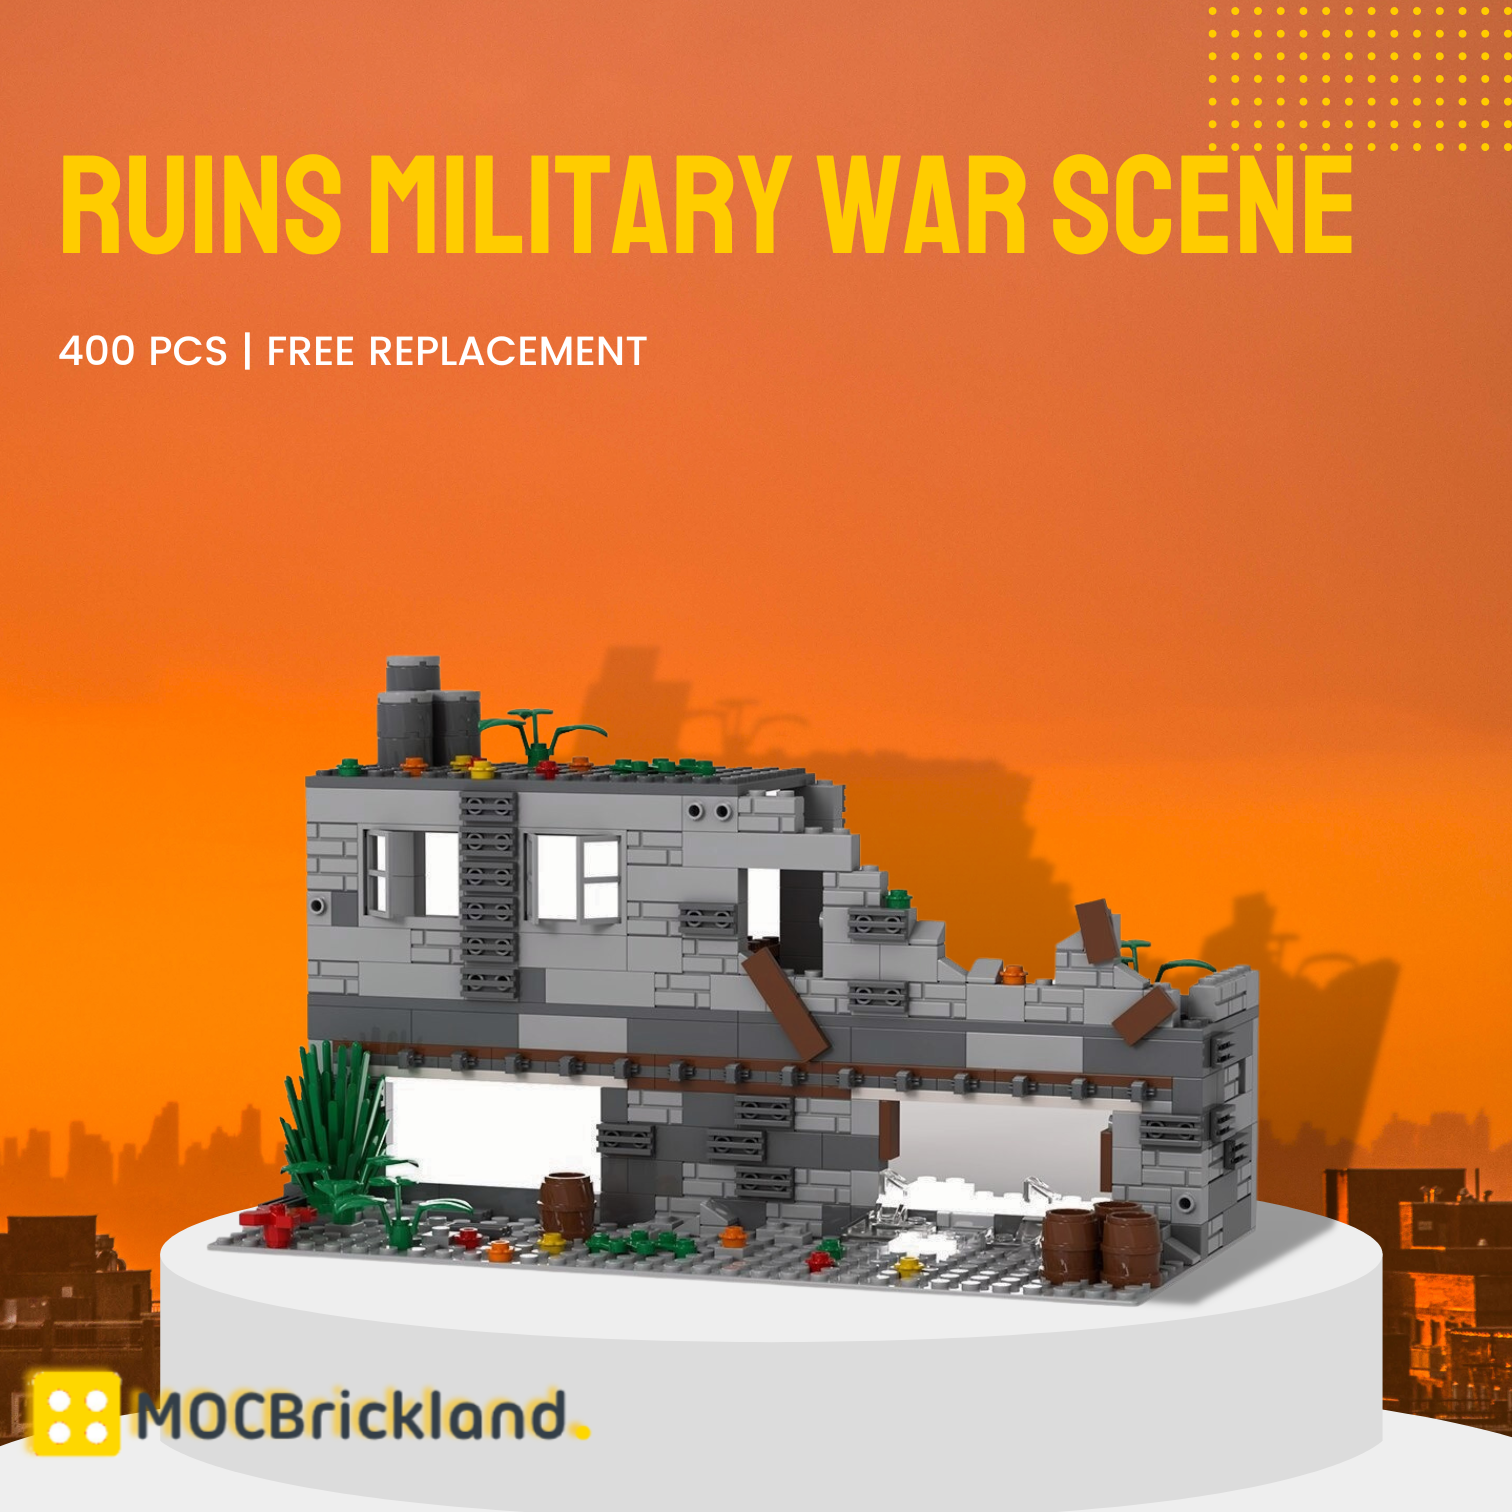 Ruins Military War Scene MOC-89524 Creator With 400 Pieces